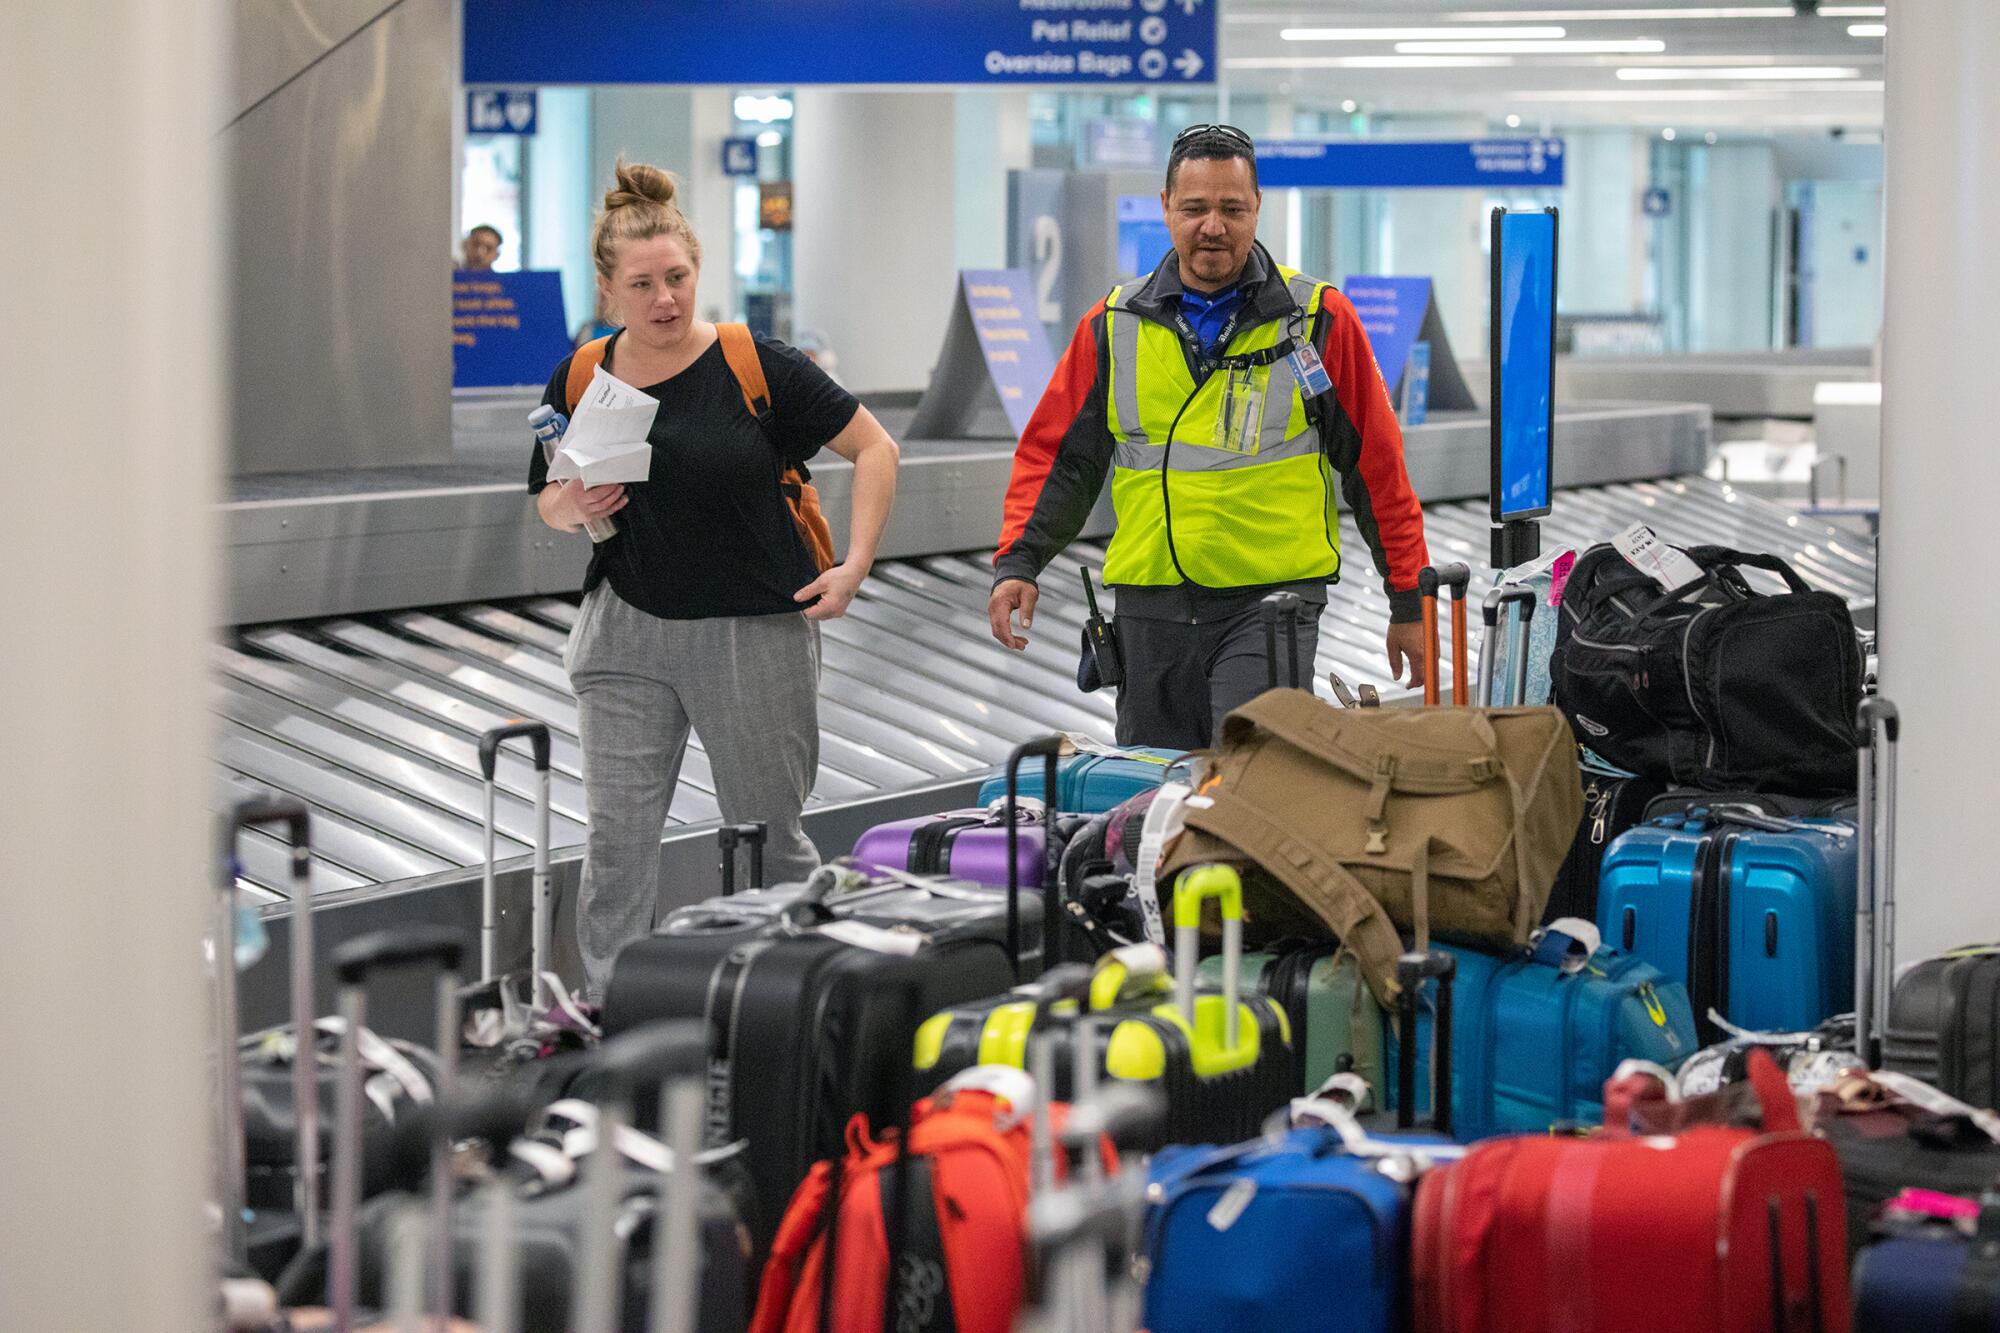 A Southwest Airlines employee, right, helps a woman locate her luggage at an airport.